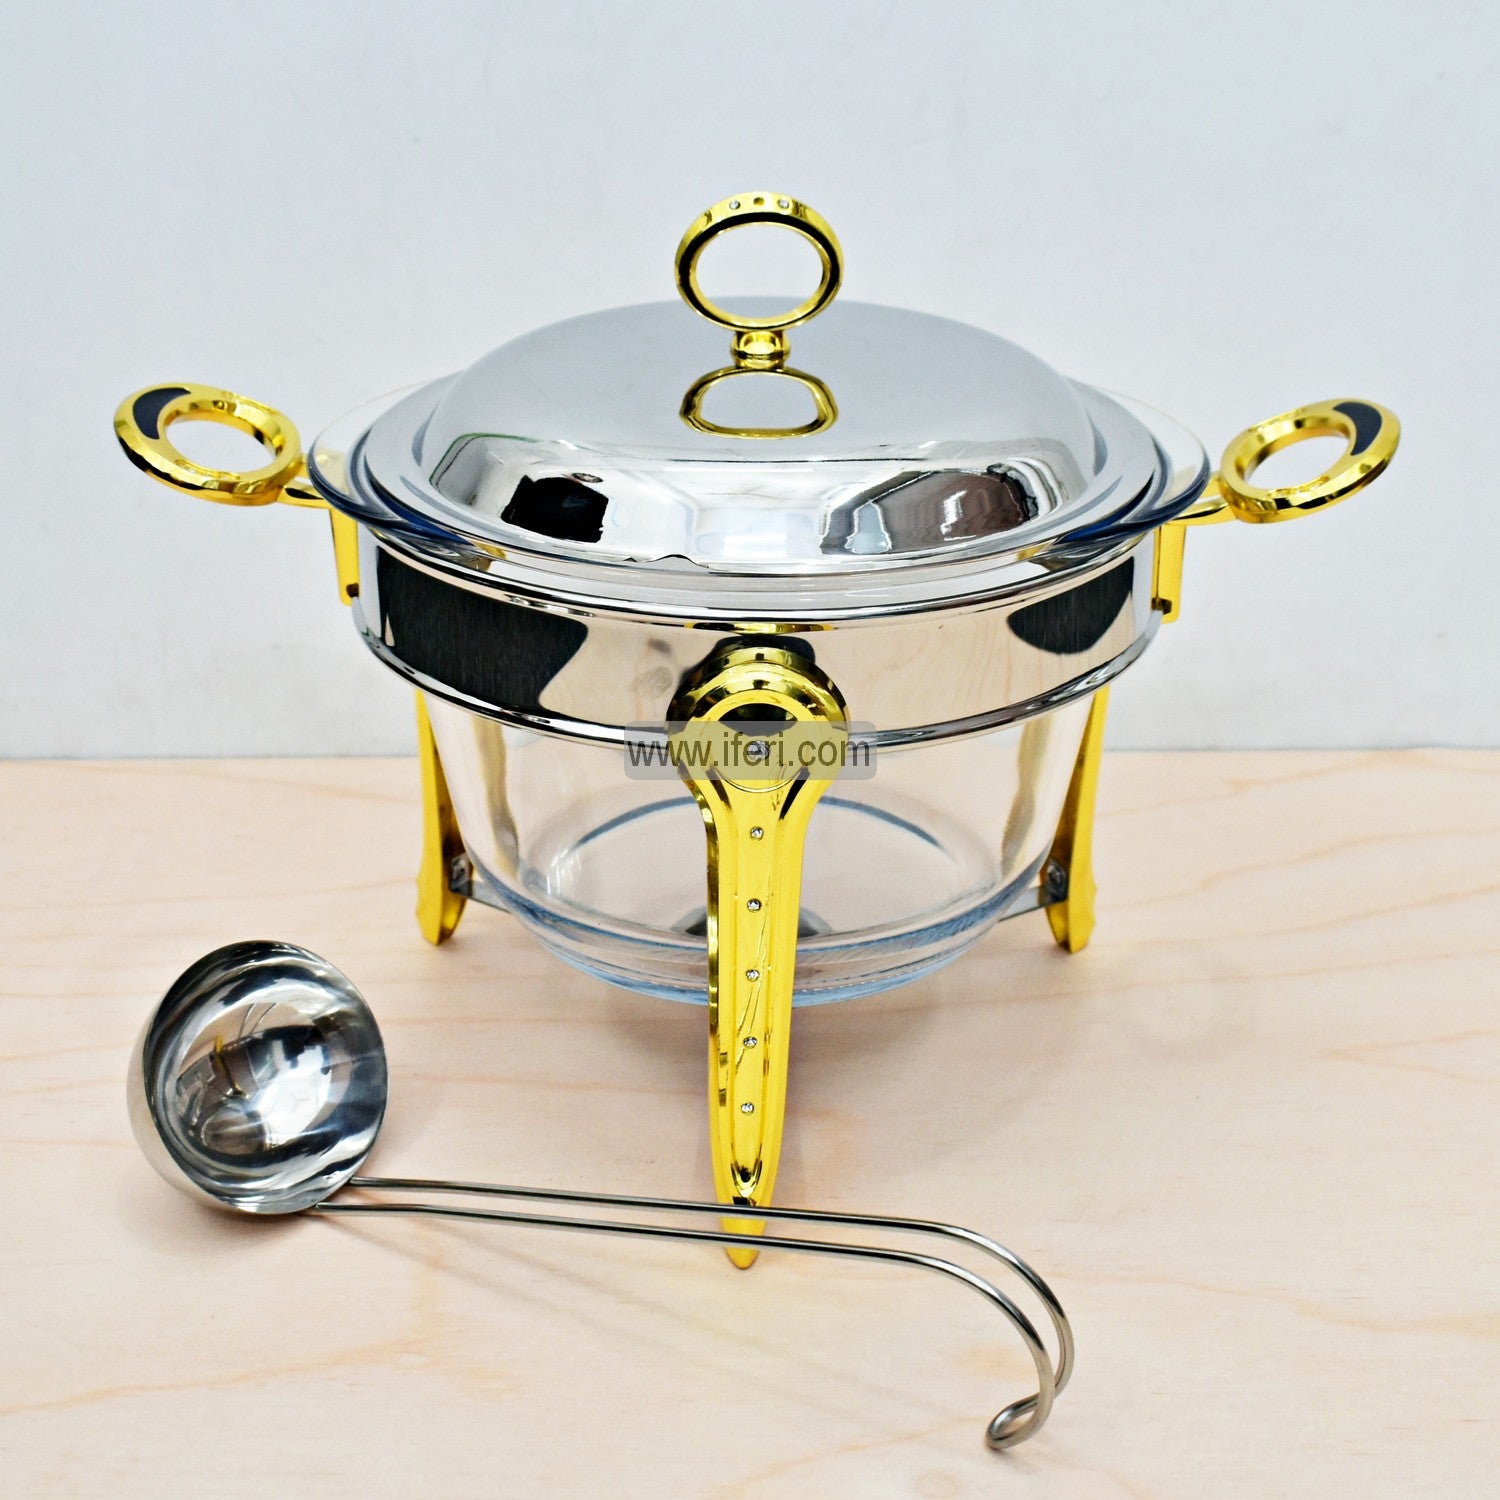 3.8 Liter Soup Serving Dish/ Chafing Dish with Warmer SY17826